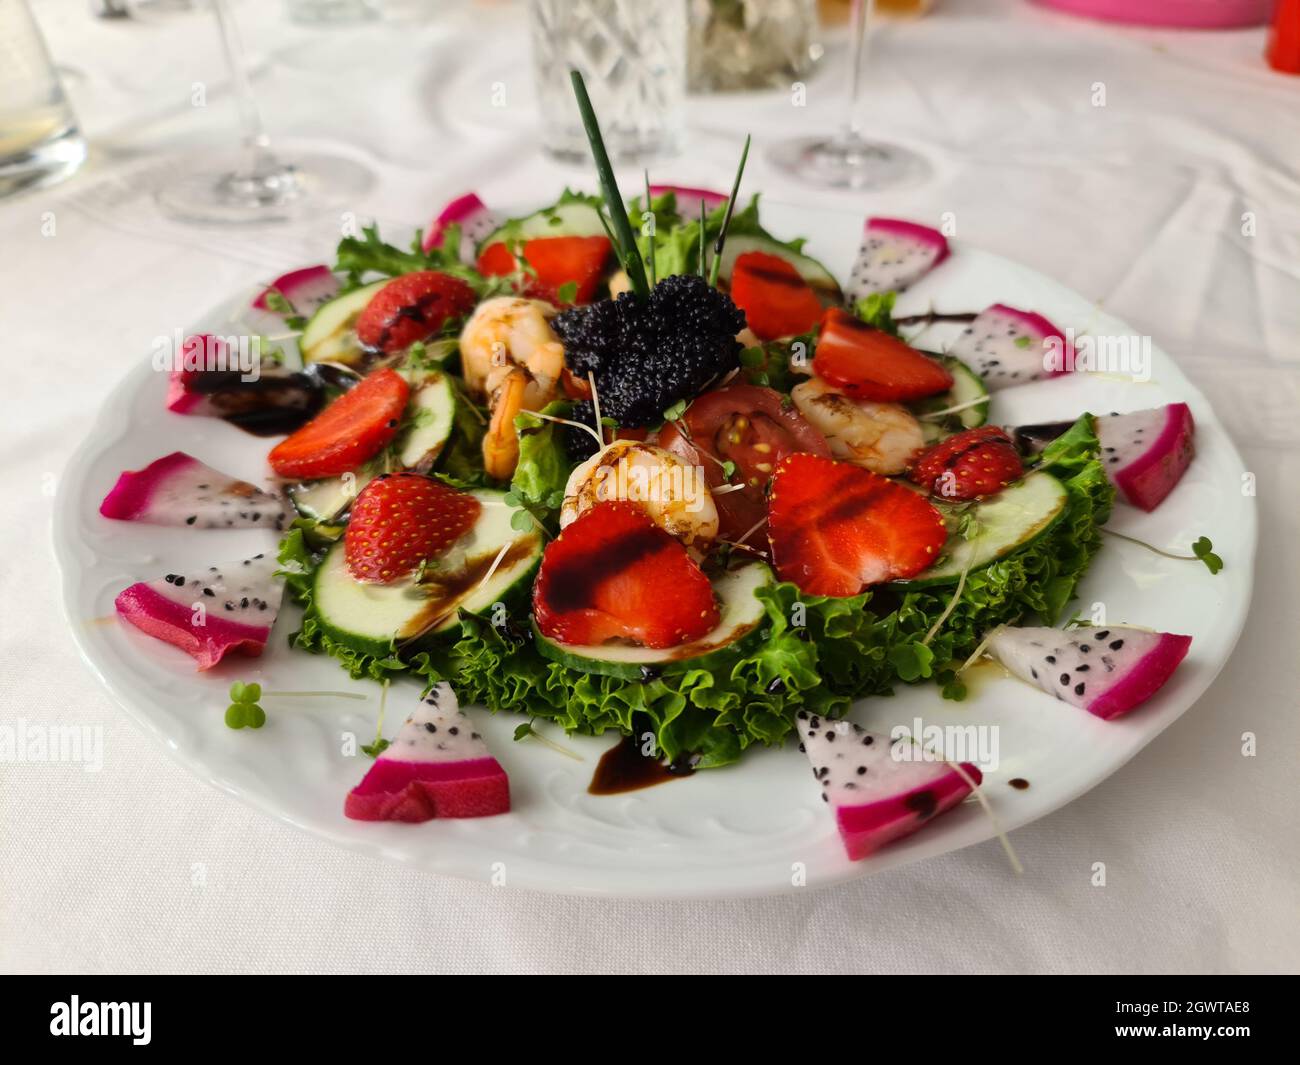 High Angle View Of Salad Served In Plate Stock Photo